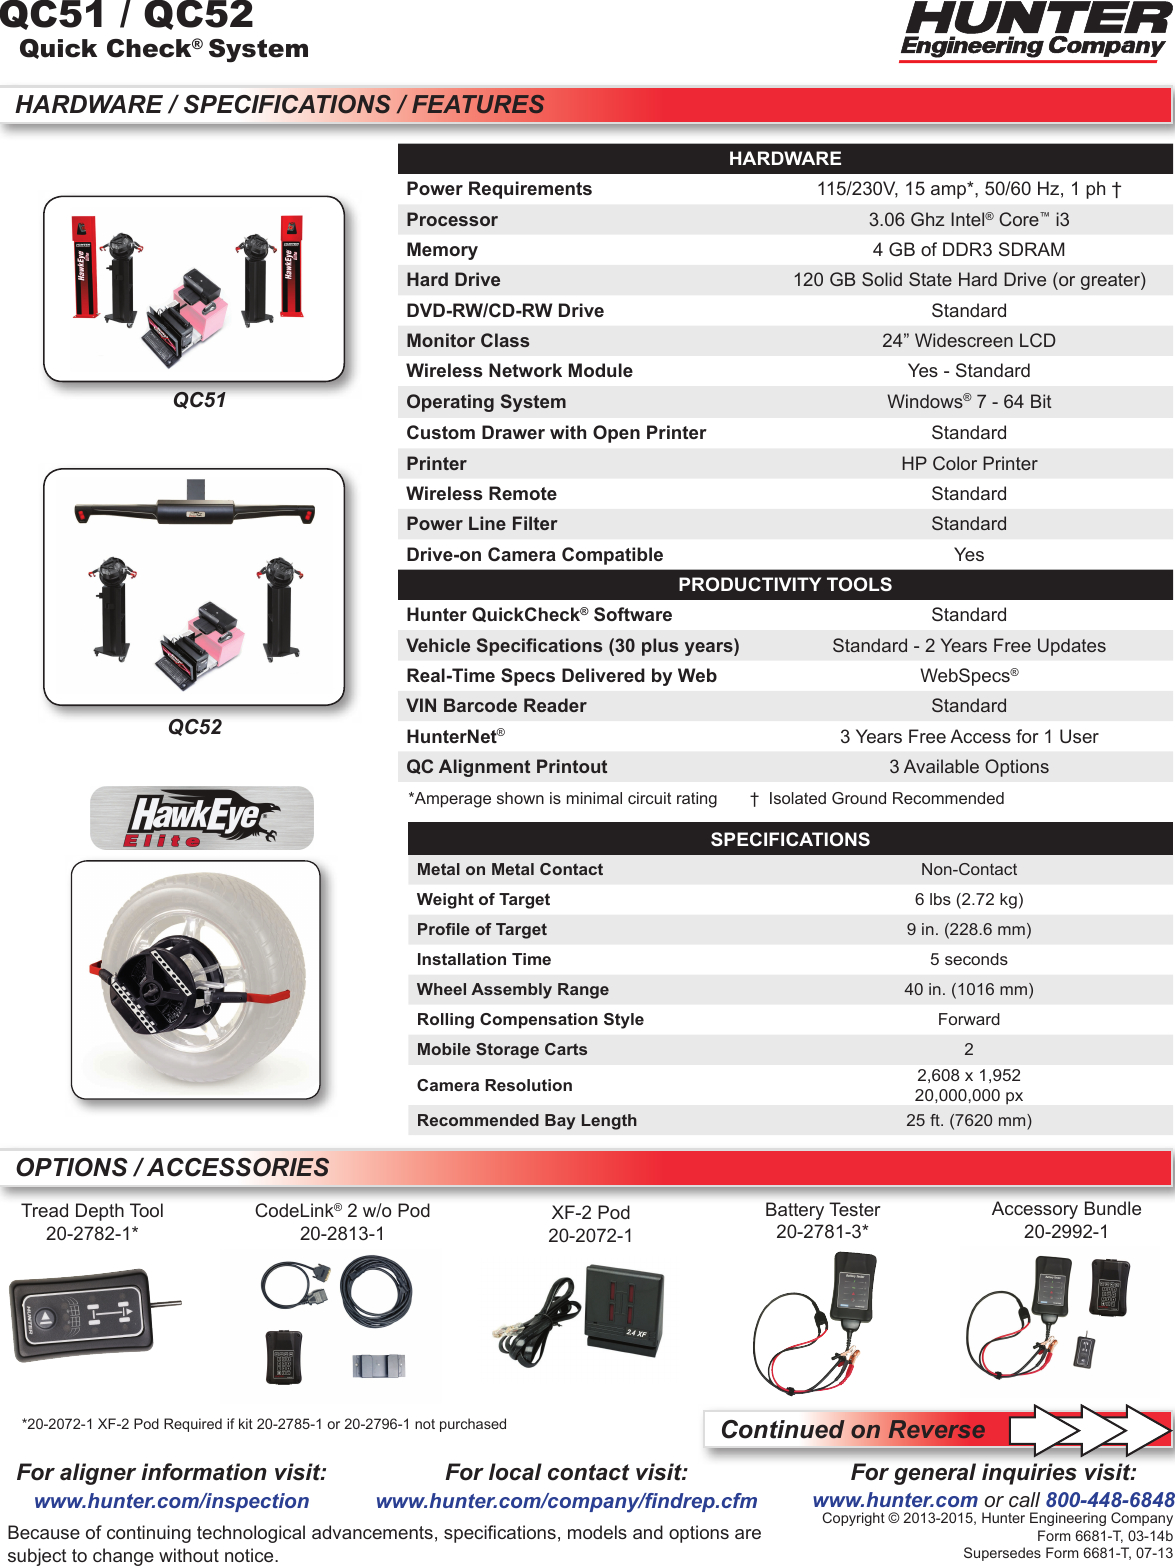 Page 1 of 2 - Hunter-Engineering Hunter-Engineering-Quick-Check-System-Specification-Sheet- QC51/QC52 Spec Sheet  Hunter-engineering-quick-check-system-specification-sheet